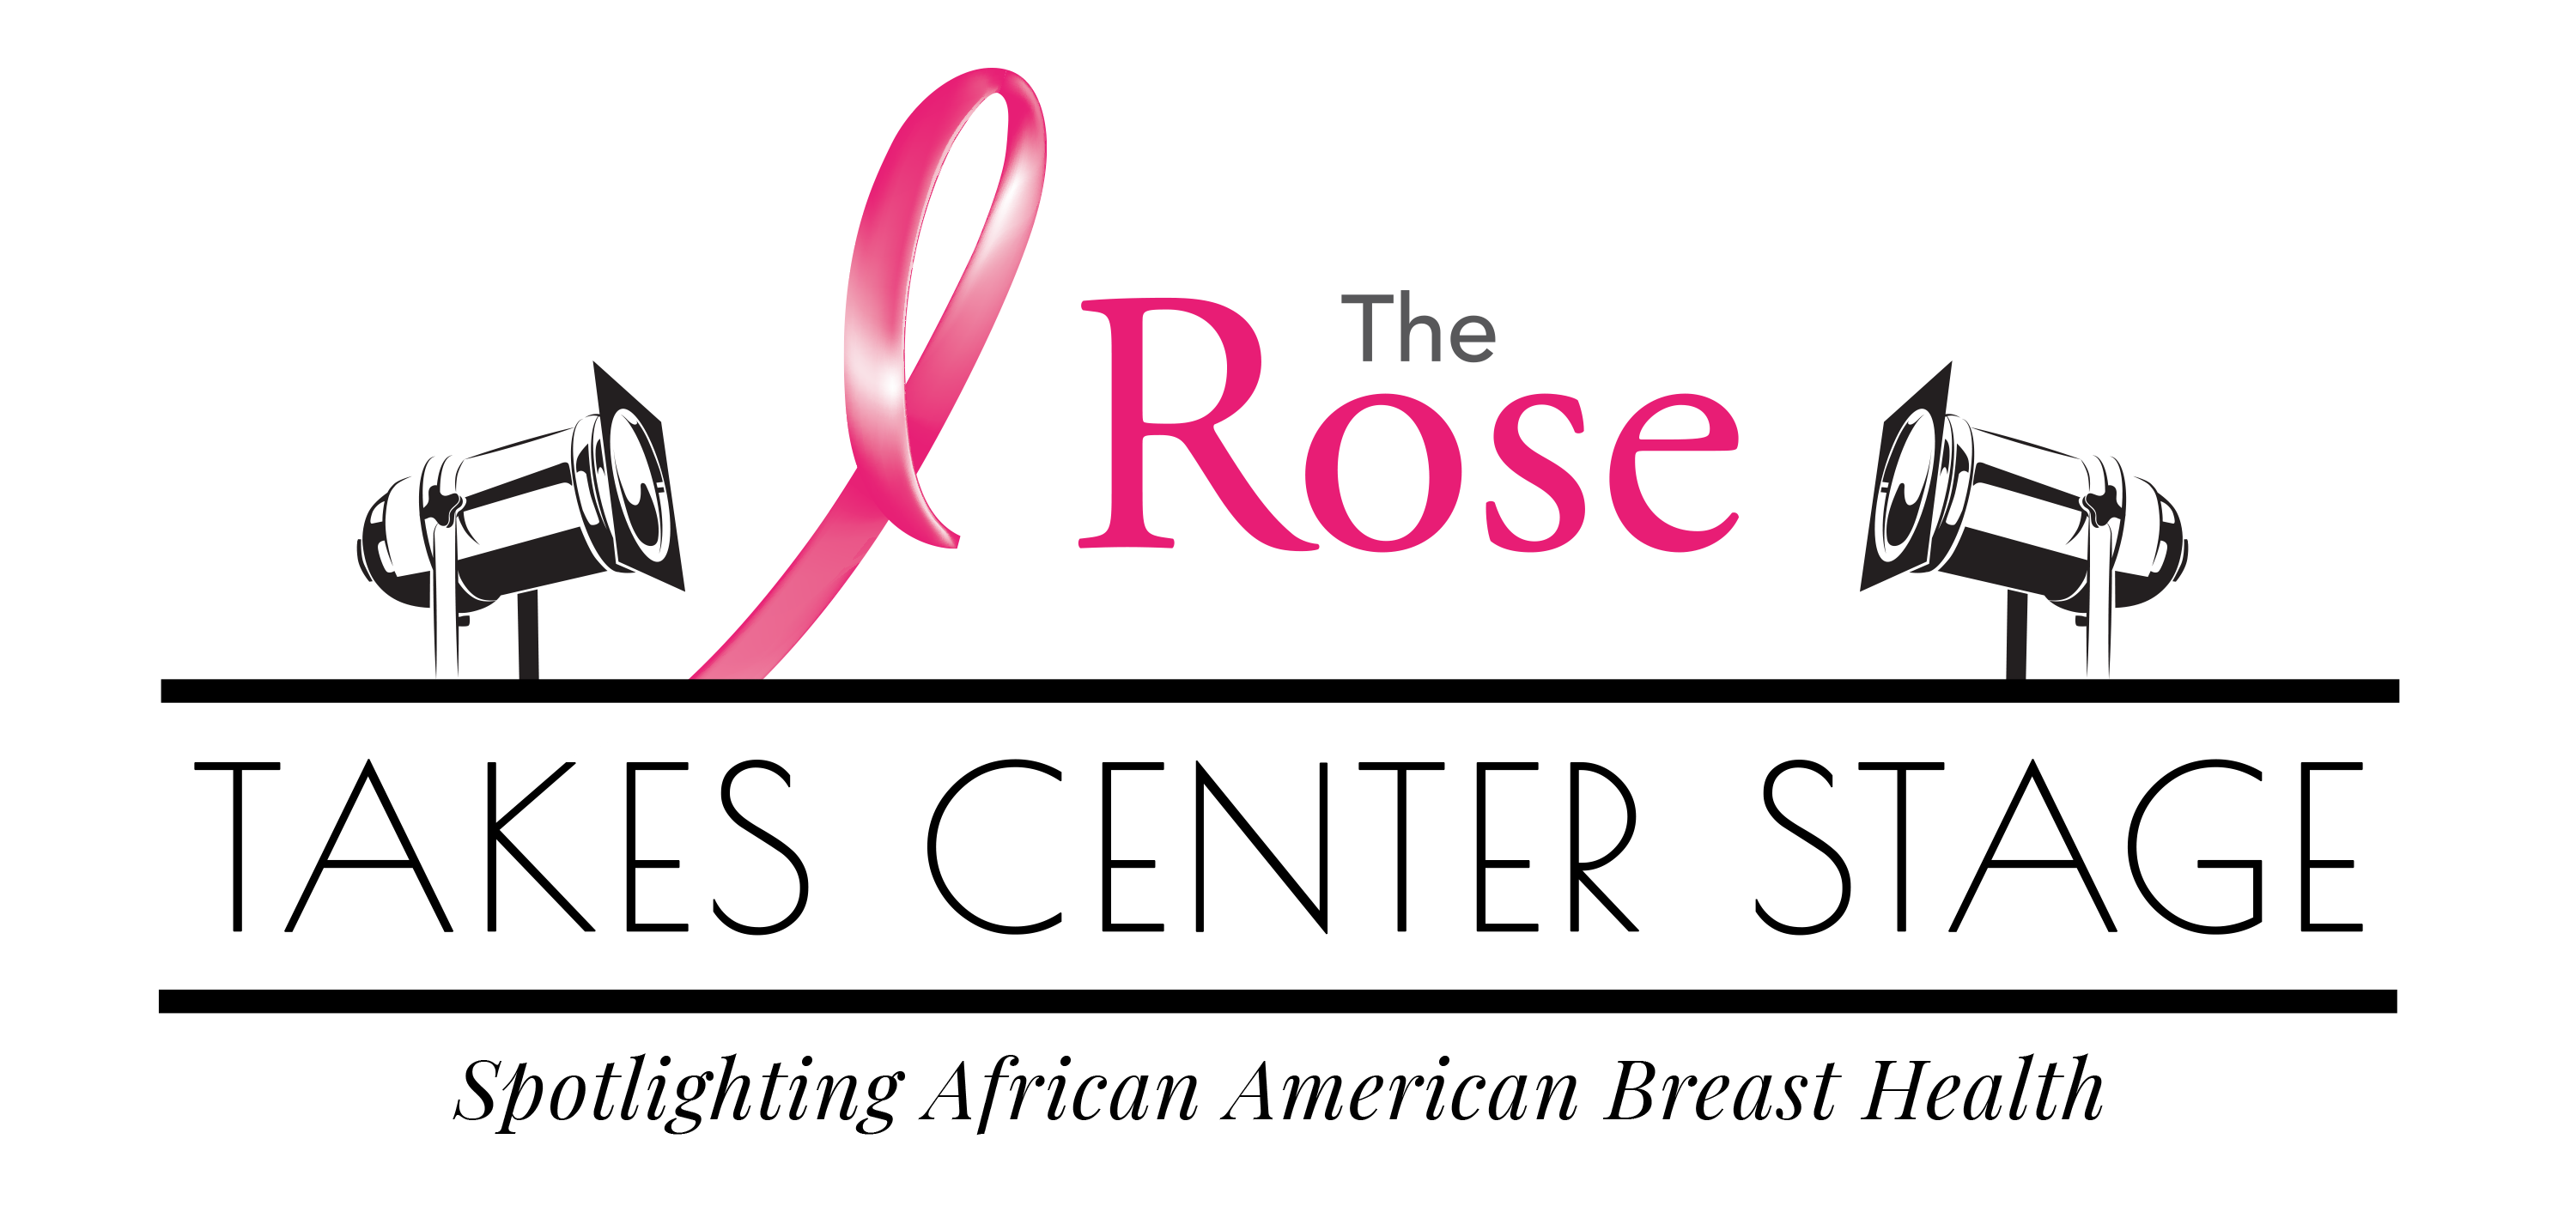 The Rose: Every Woman Deserves Quality Breast Health Care